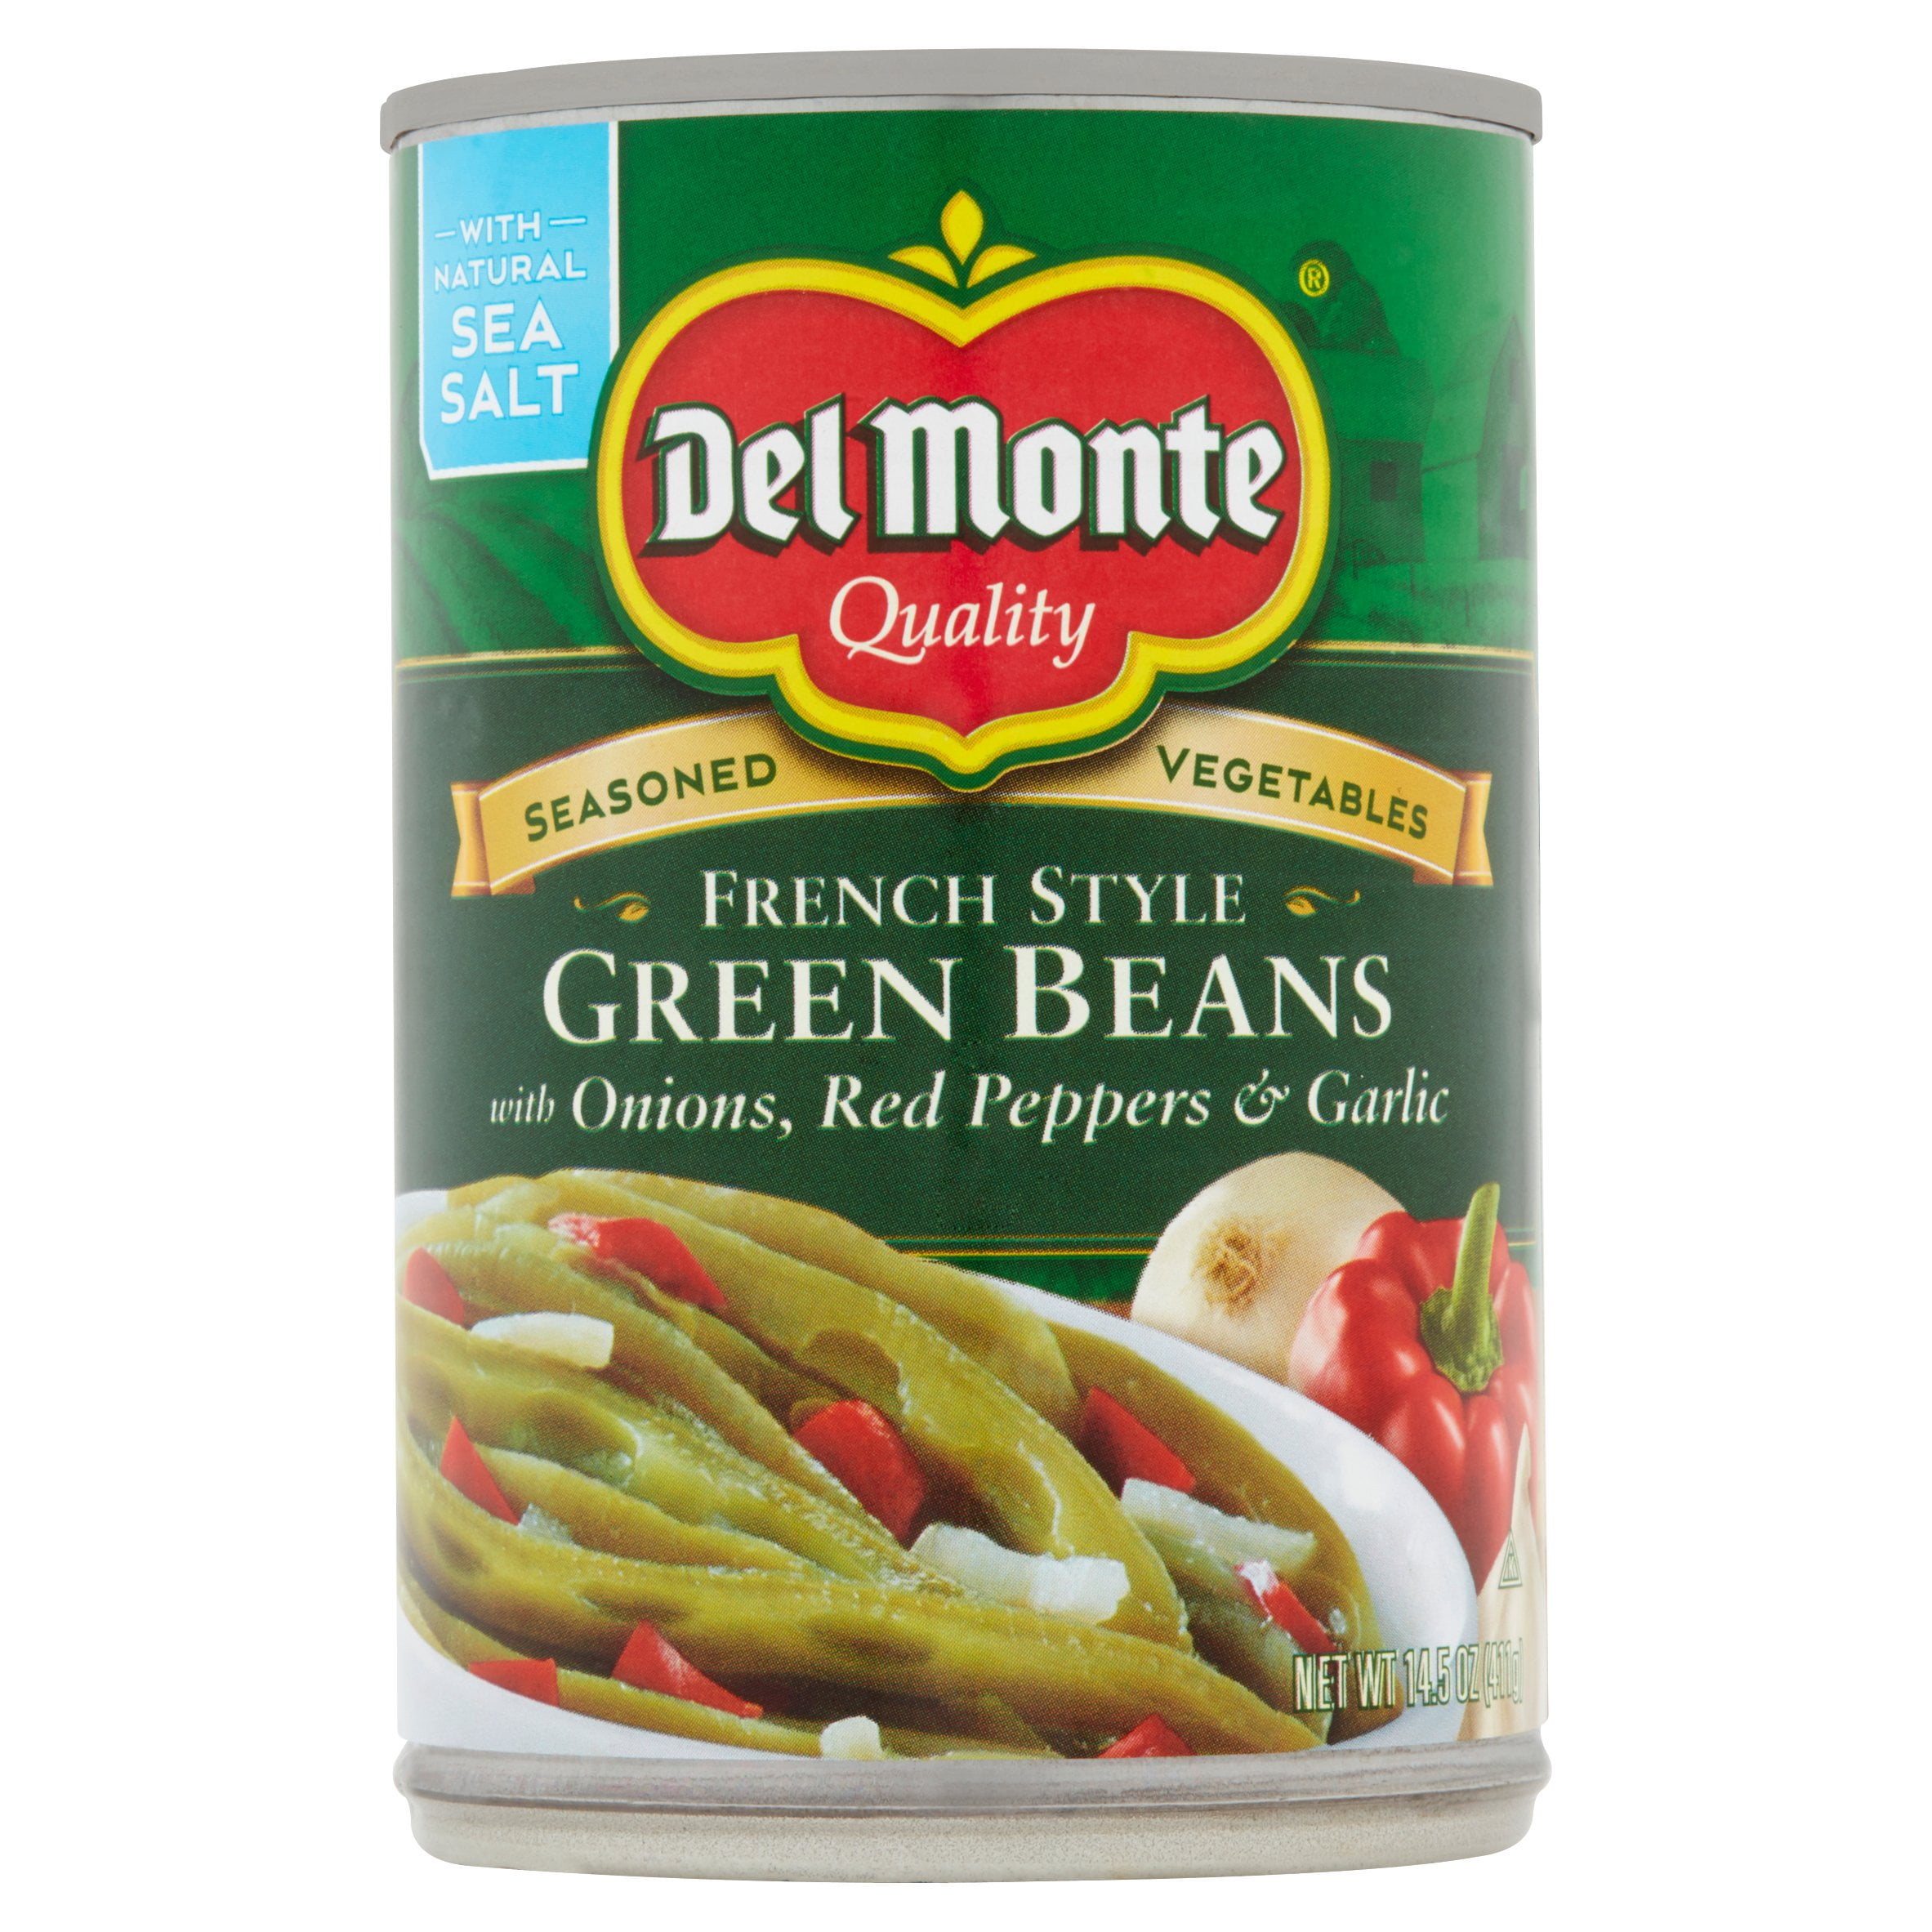 Del Monte Canned French Style Green Beans, 14.5 oz, Can - Walmart.com